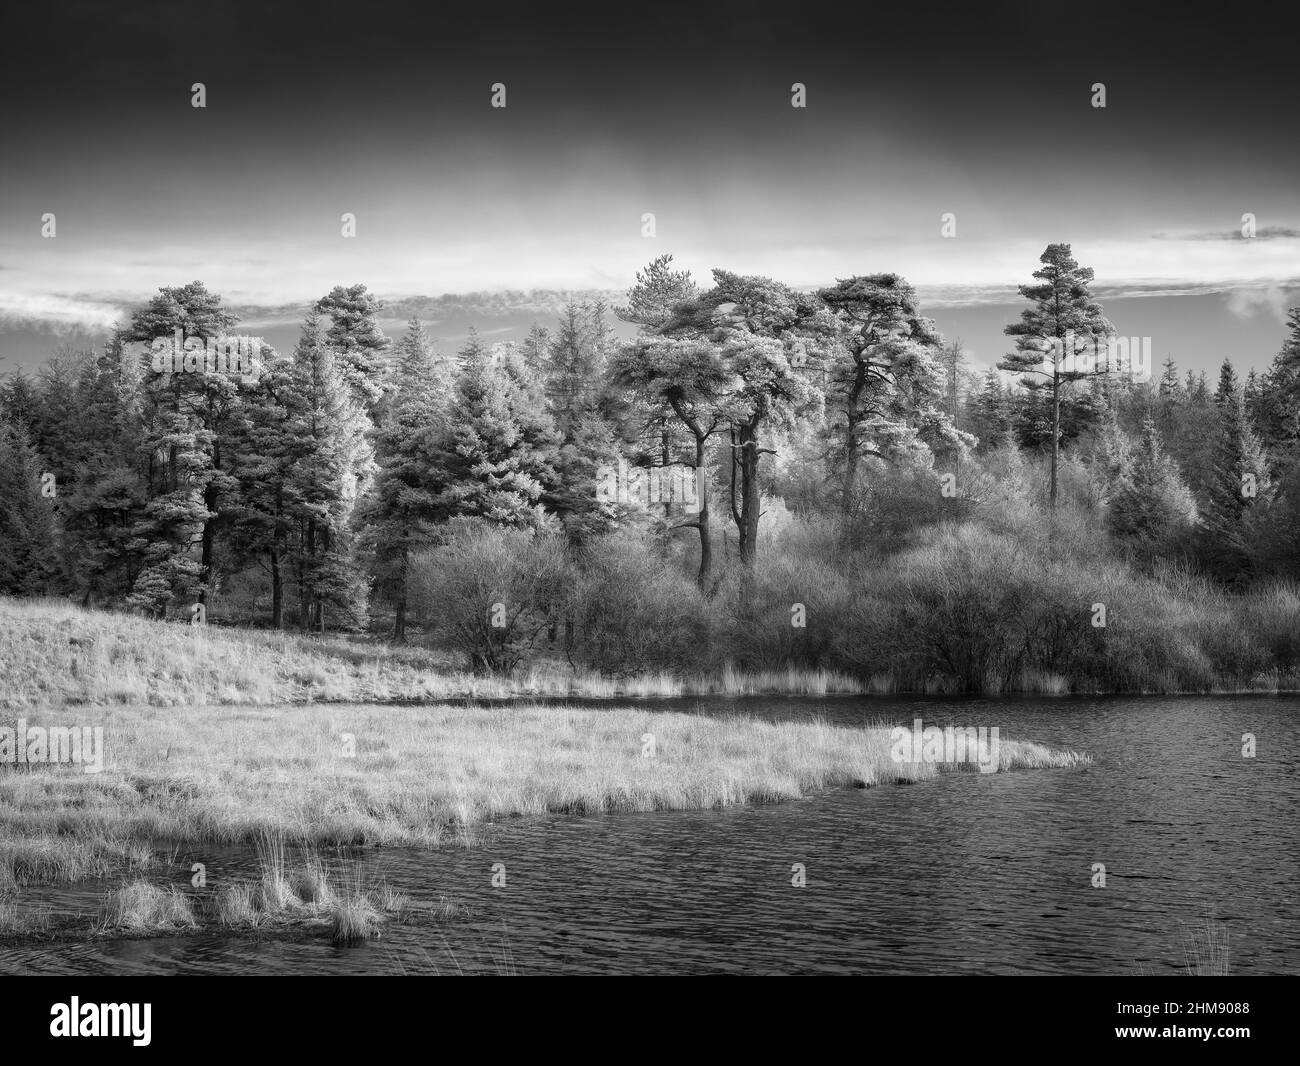 An infrared image of Waldergrave Pool and Stockhill Wood at Priddy Mineries, the old mining landscape in the Mendip Hills National Landscape, Somerset, England. Stock Photo